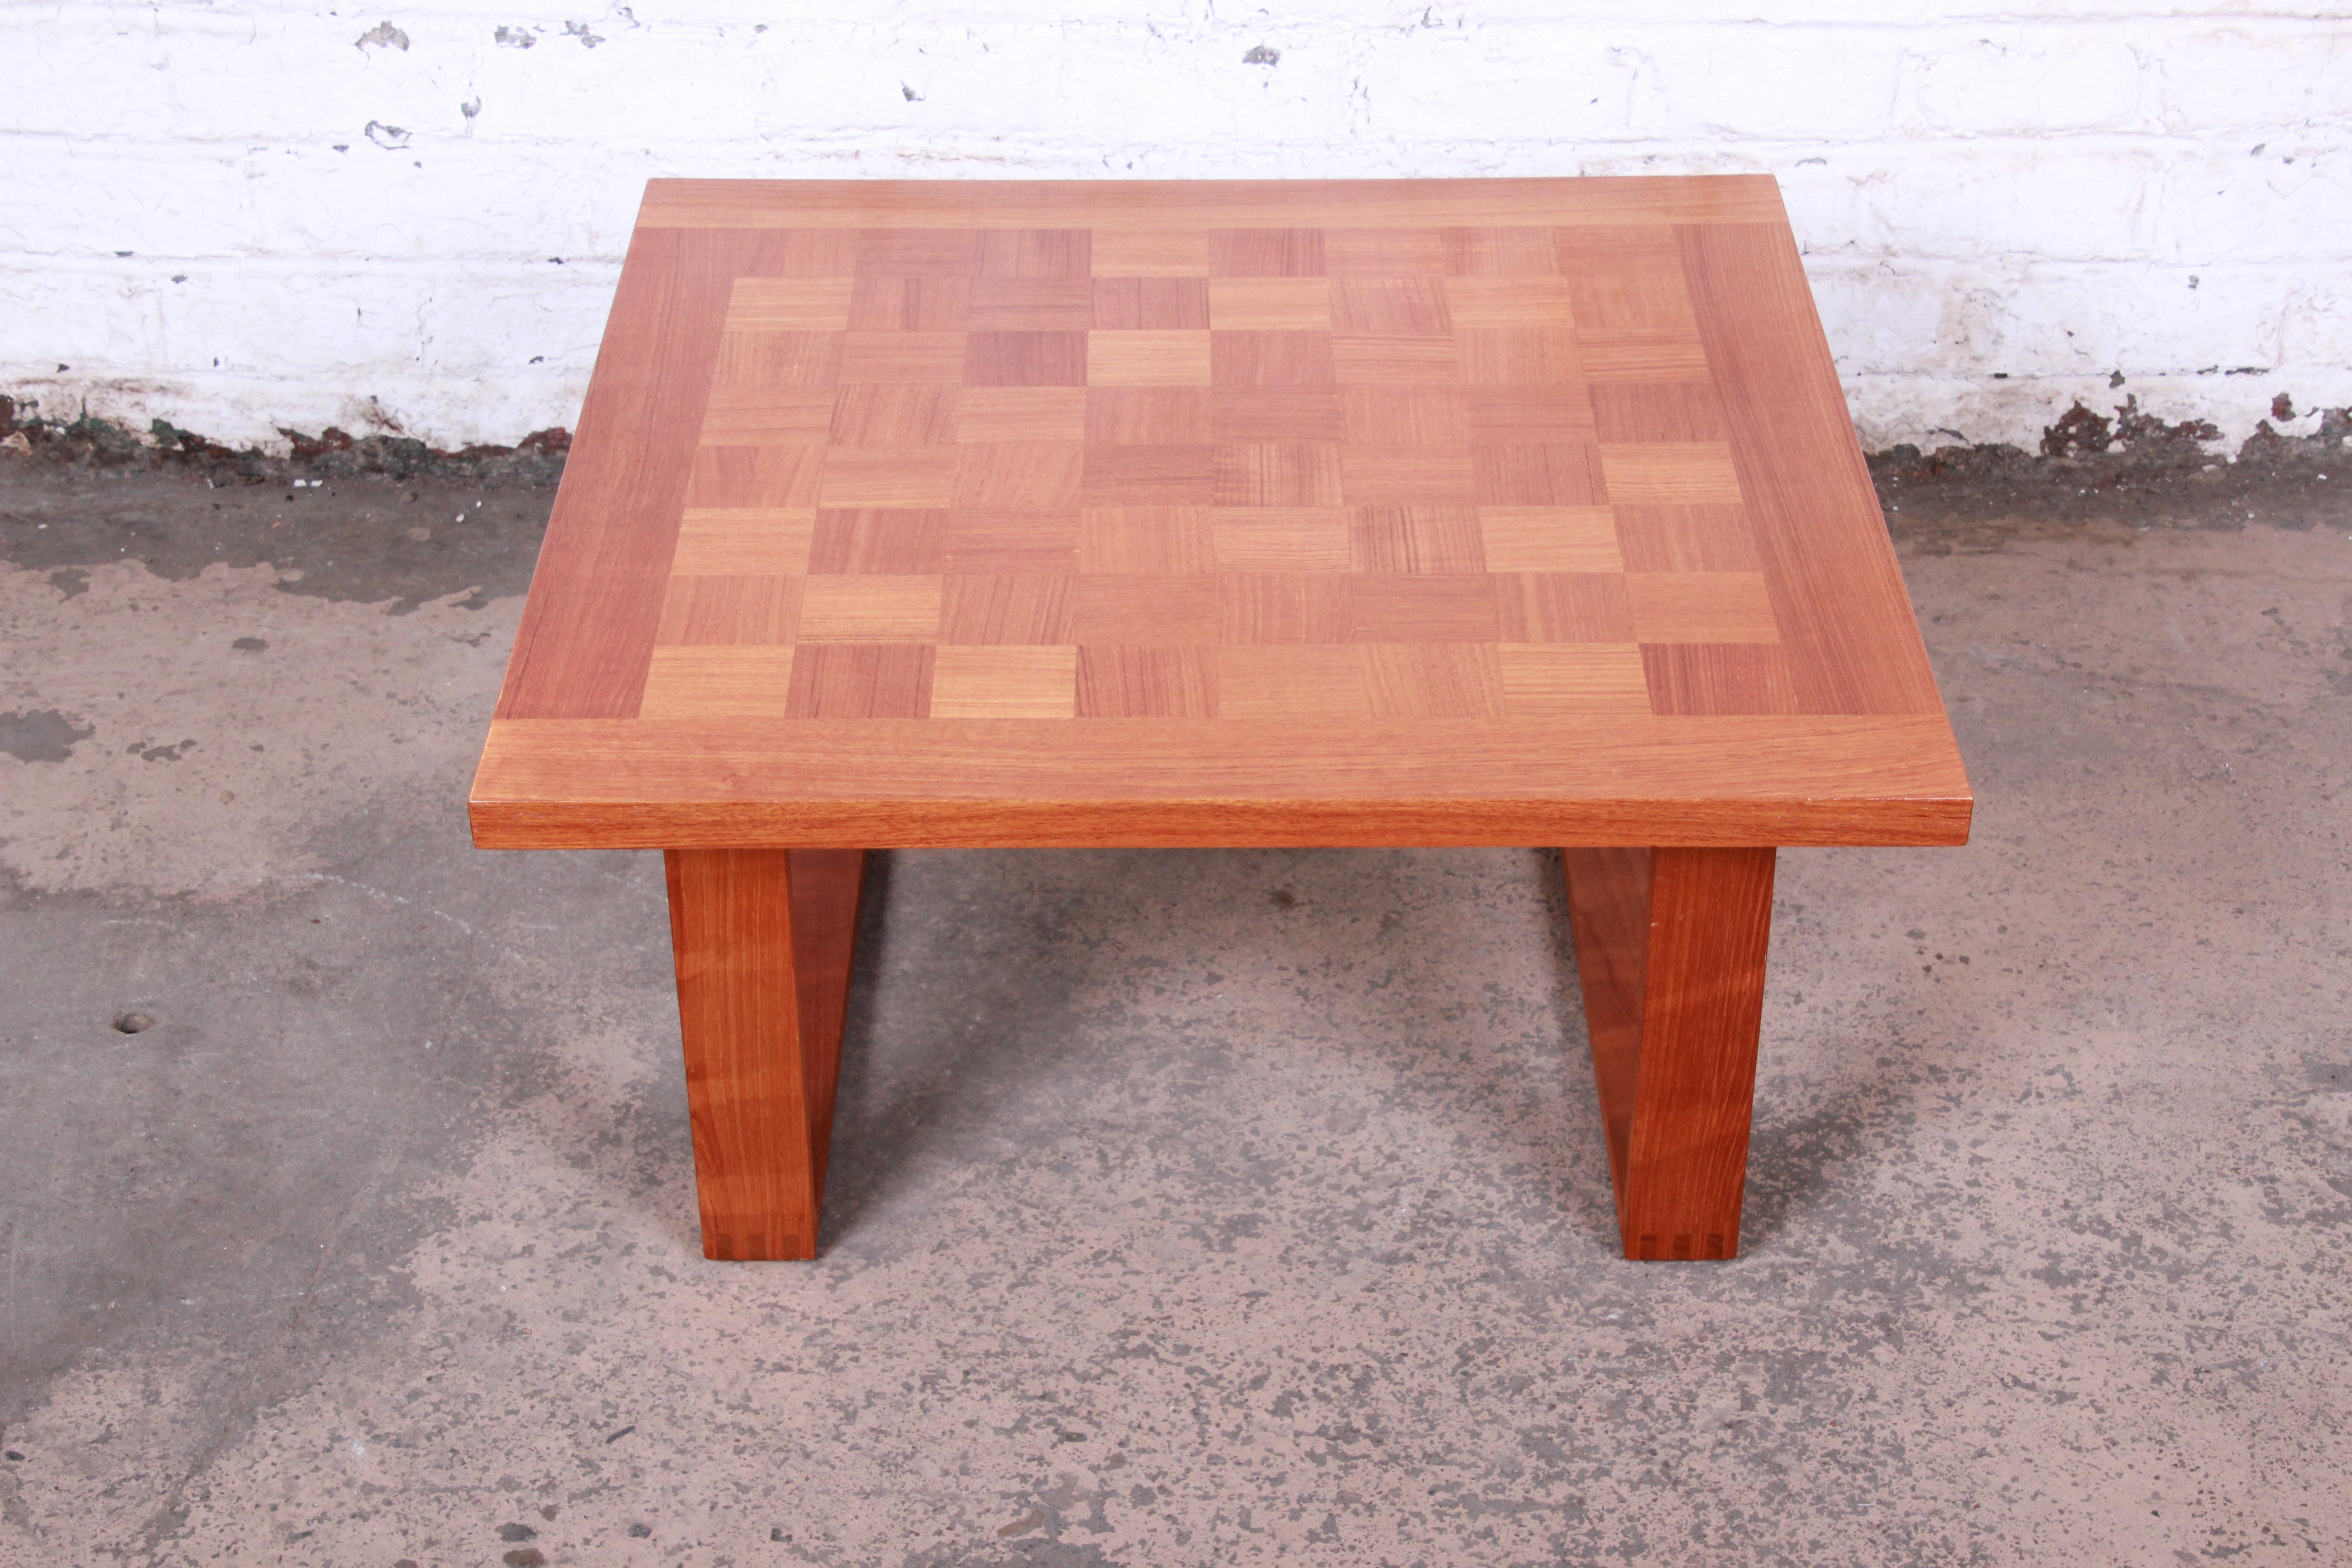 A gorgeous midcentury Danish Modern teak coffee table by Poul Cadovious for France & Son. The table features beautiful teak wood grain with an inlaid checkerboard design on top and exposed dovetail joints on the legs. The original label is present